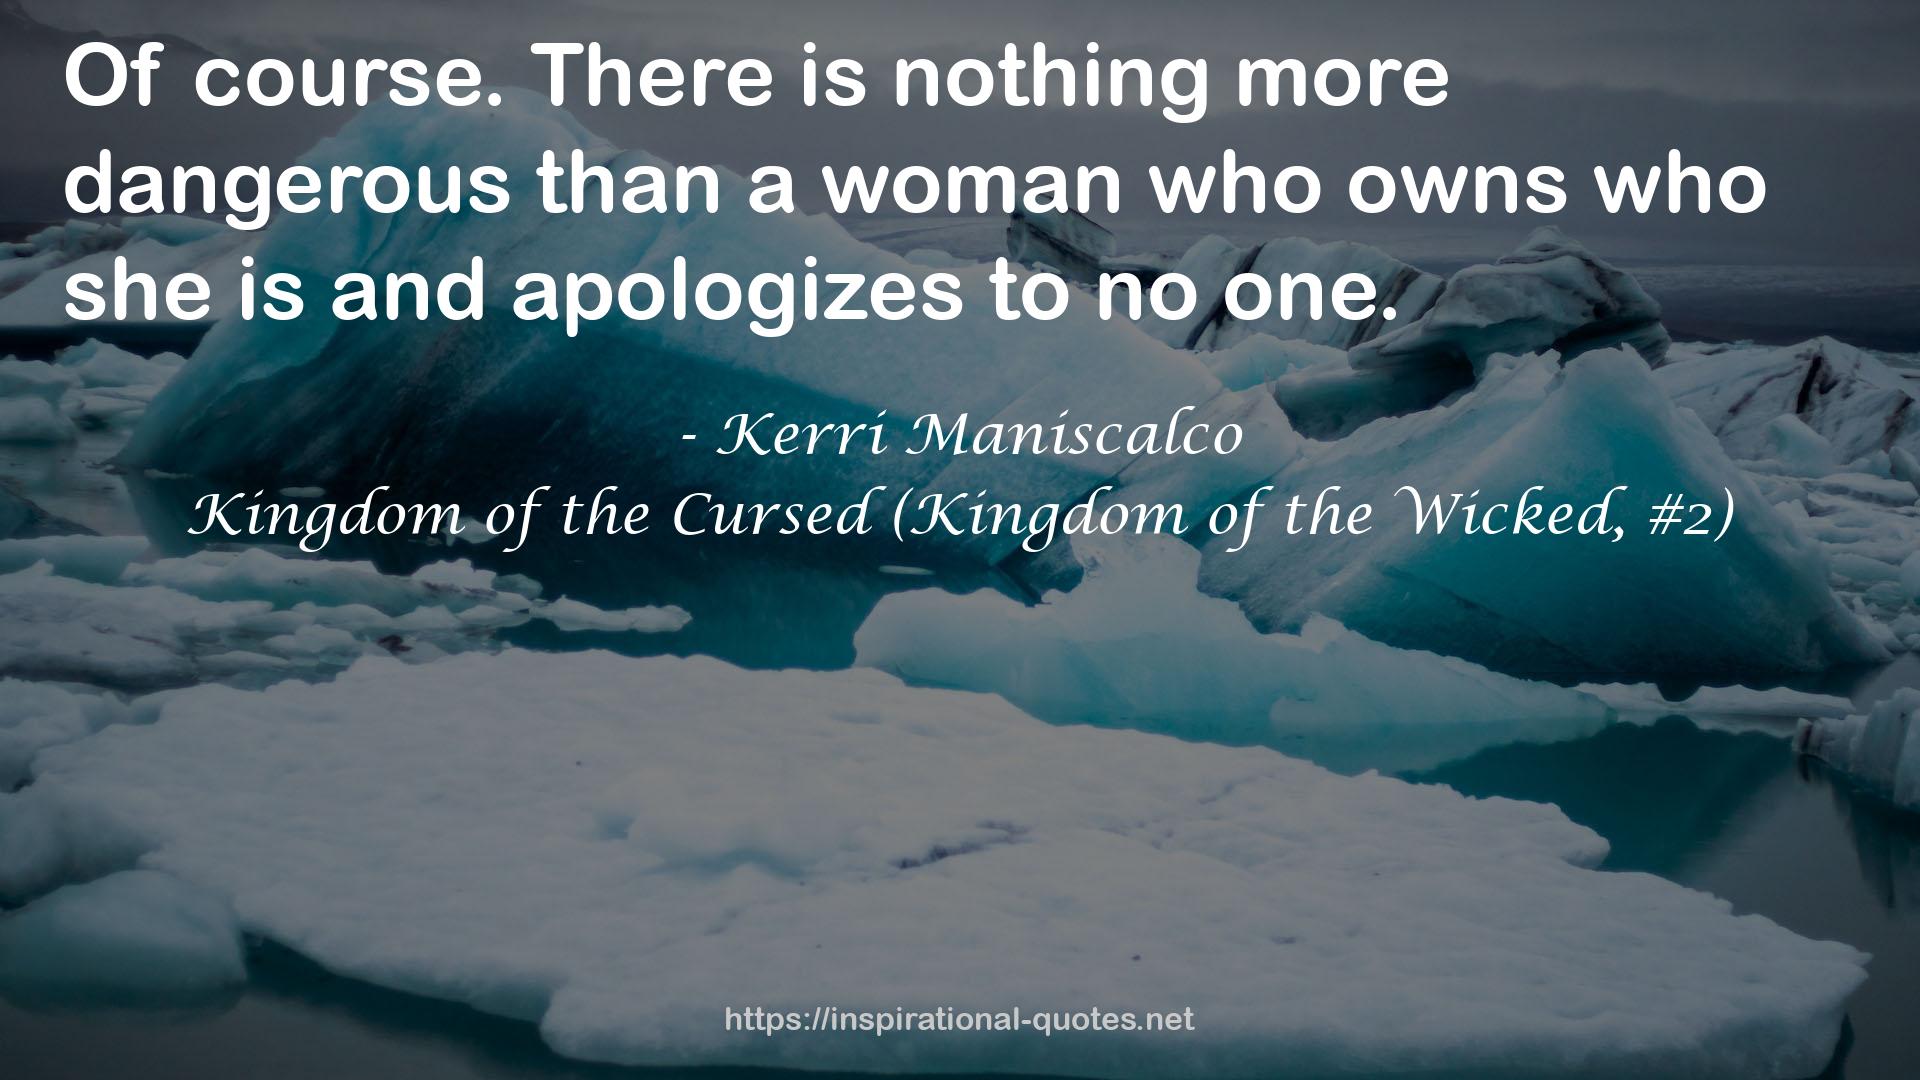 Kingdom of the Cursed (Kingdom of the Wicked, #2) QUOTES